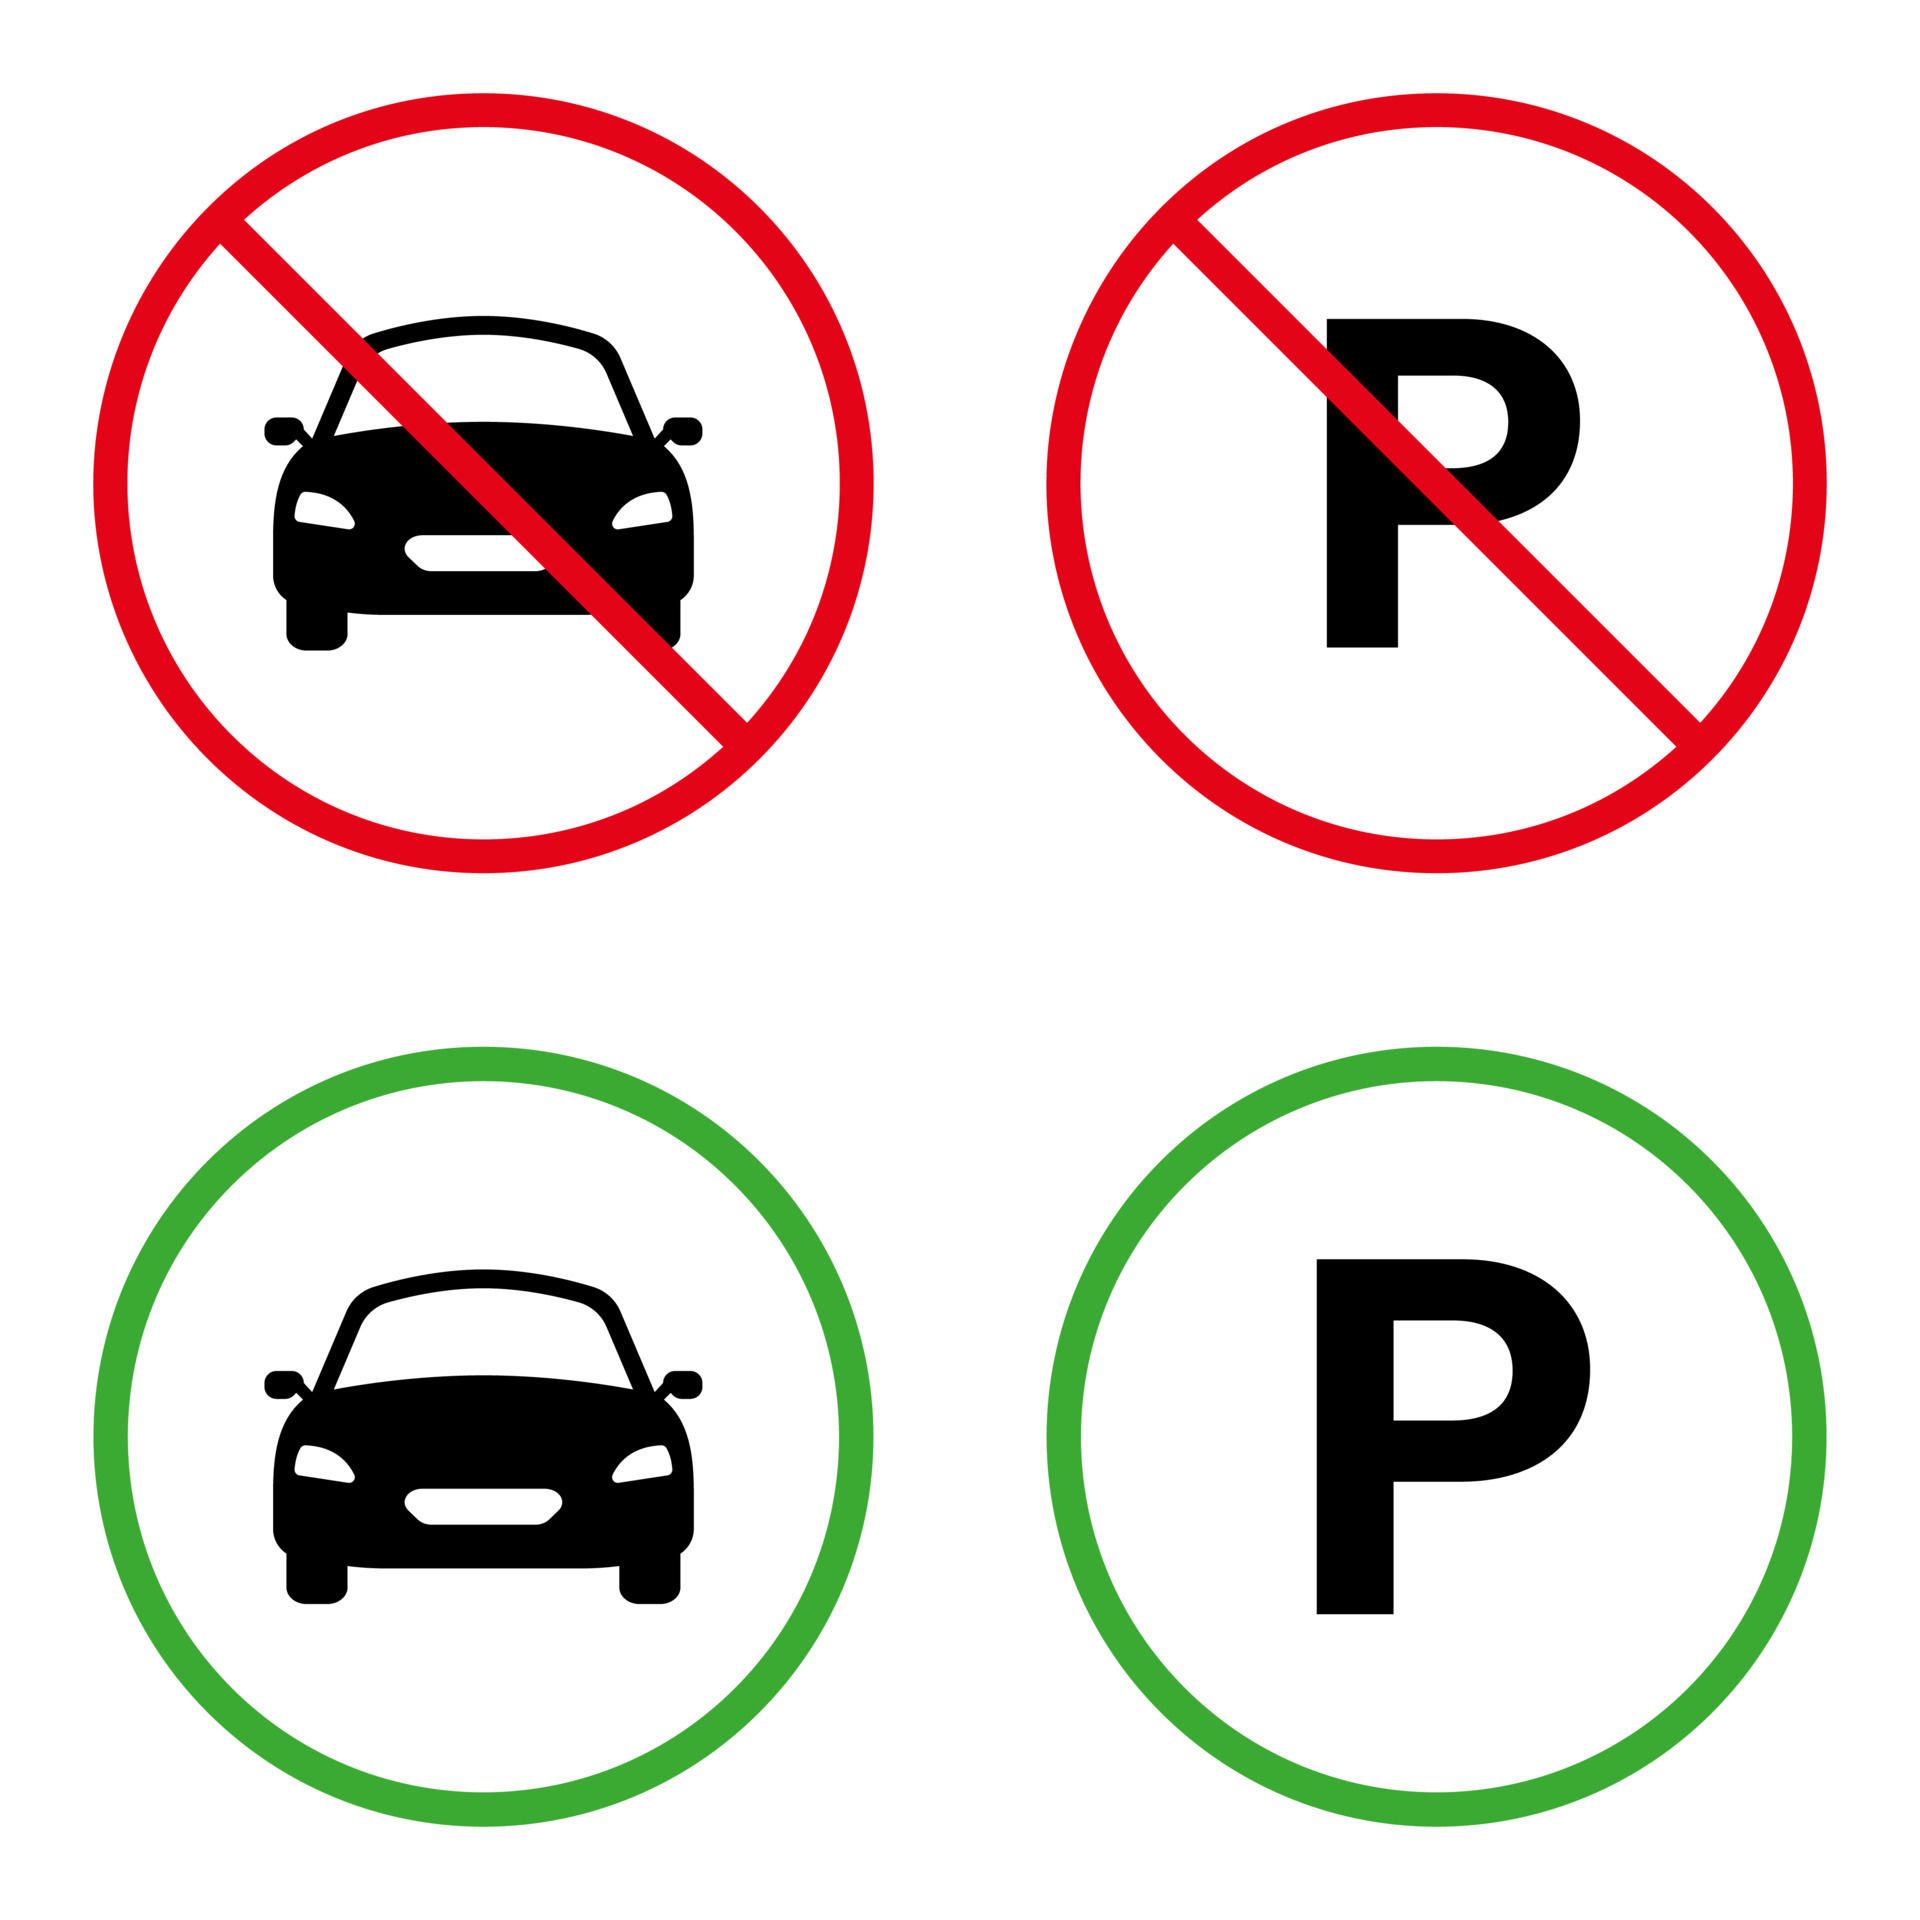 https://static.vecteezy.com/system/resources/previews/009/488/349/original/forbid-parking-car-silhouette-pictogram-park-vehicle-transport-allowed-road-green-sign-car-prohibited-black-icon-attention-private-parking-zone-red-stop-symbol-isolated-illustration-vector.jpg